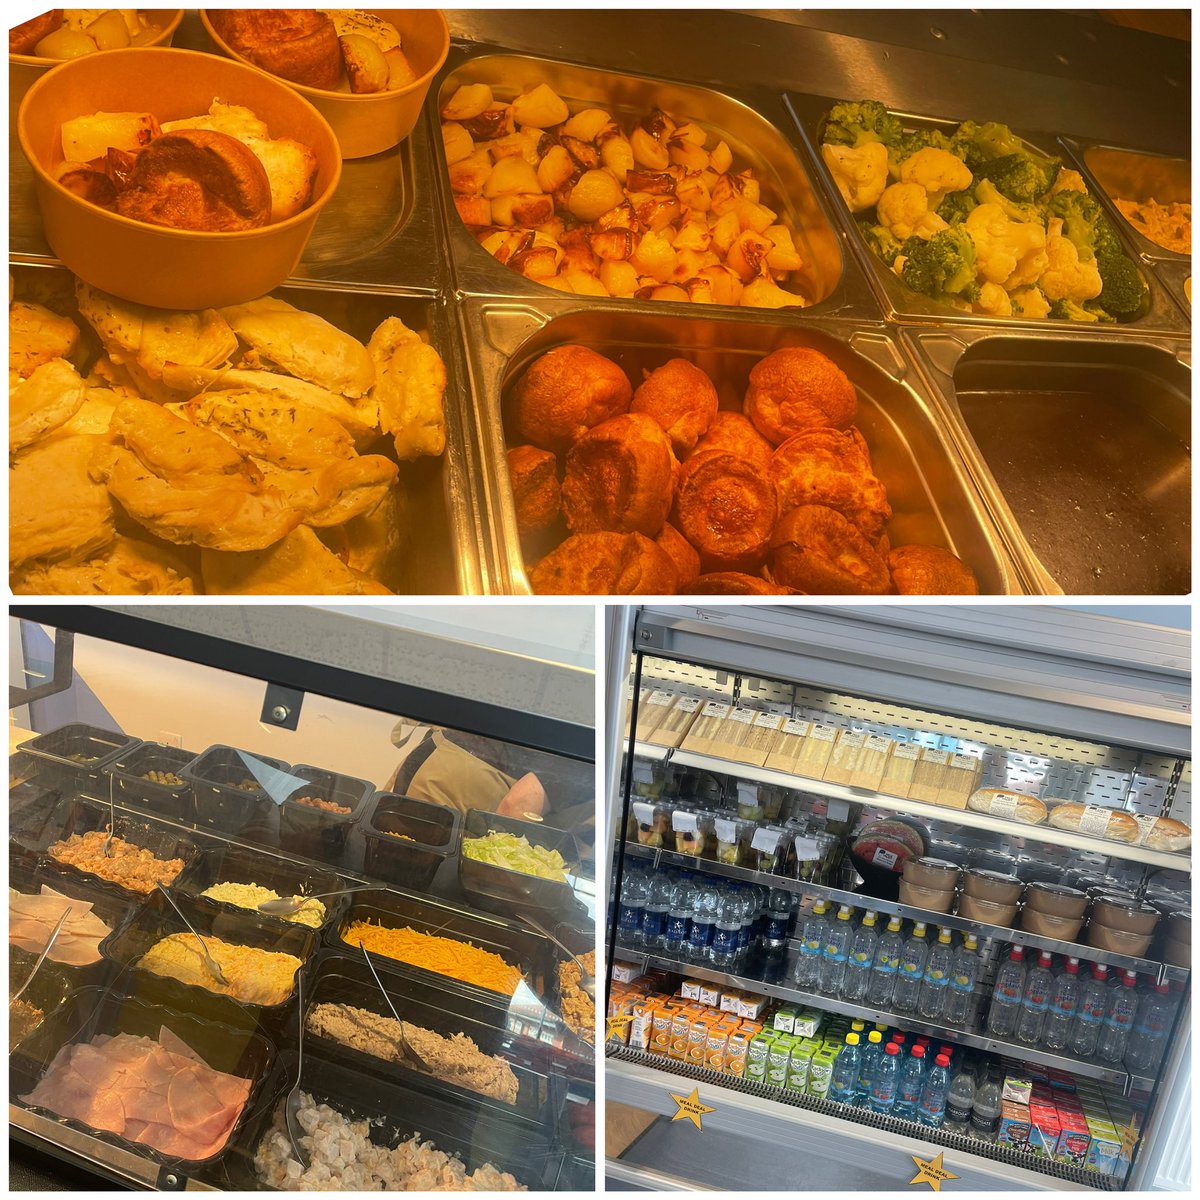 Richard, Graeme & the new kitchen team have made a great start to their new menus & canteen experience. Loads of really positive feedback from both staff & pupils. We look forward to more delicious delights this term! Thank you for your hard work. @PeleTrust #FitForLife